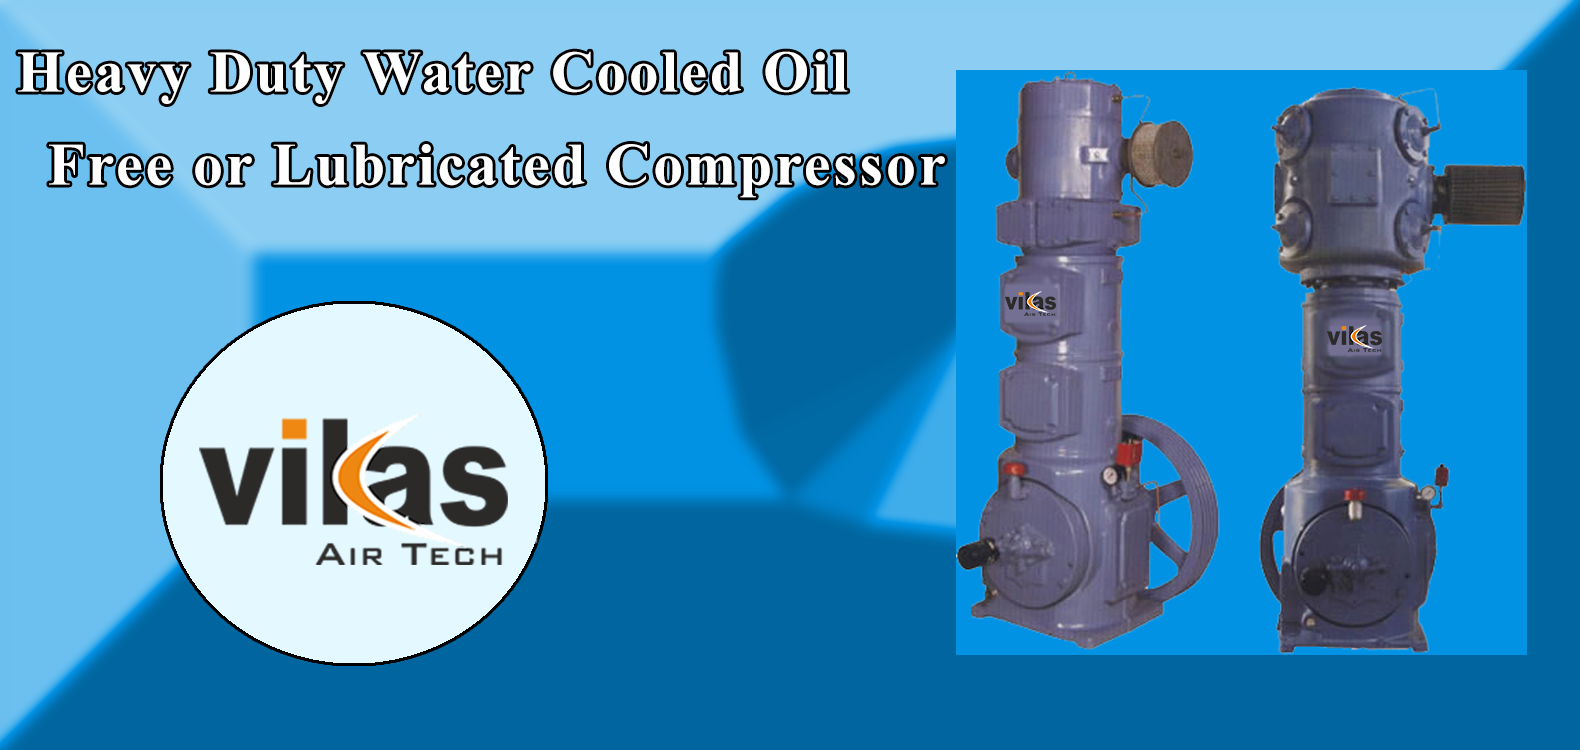 Heavy Duty Water Cooled Oil Lubricated Compressor